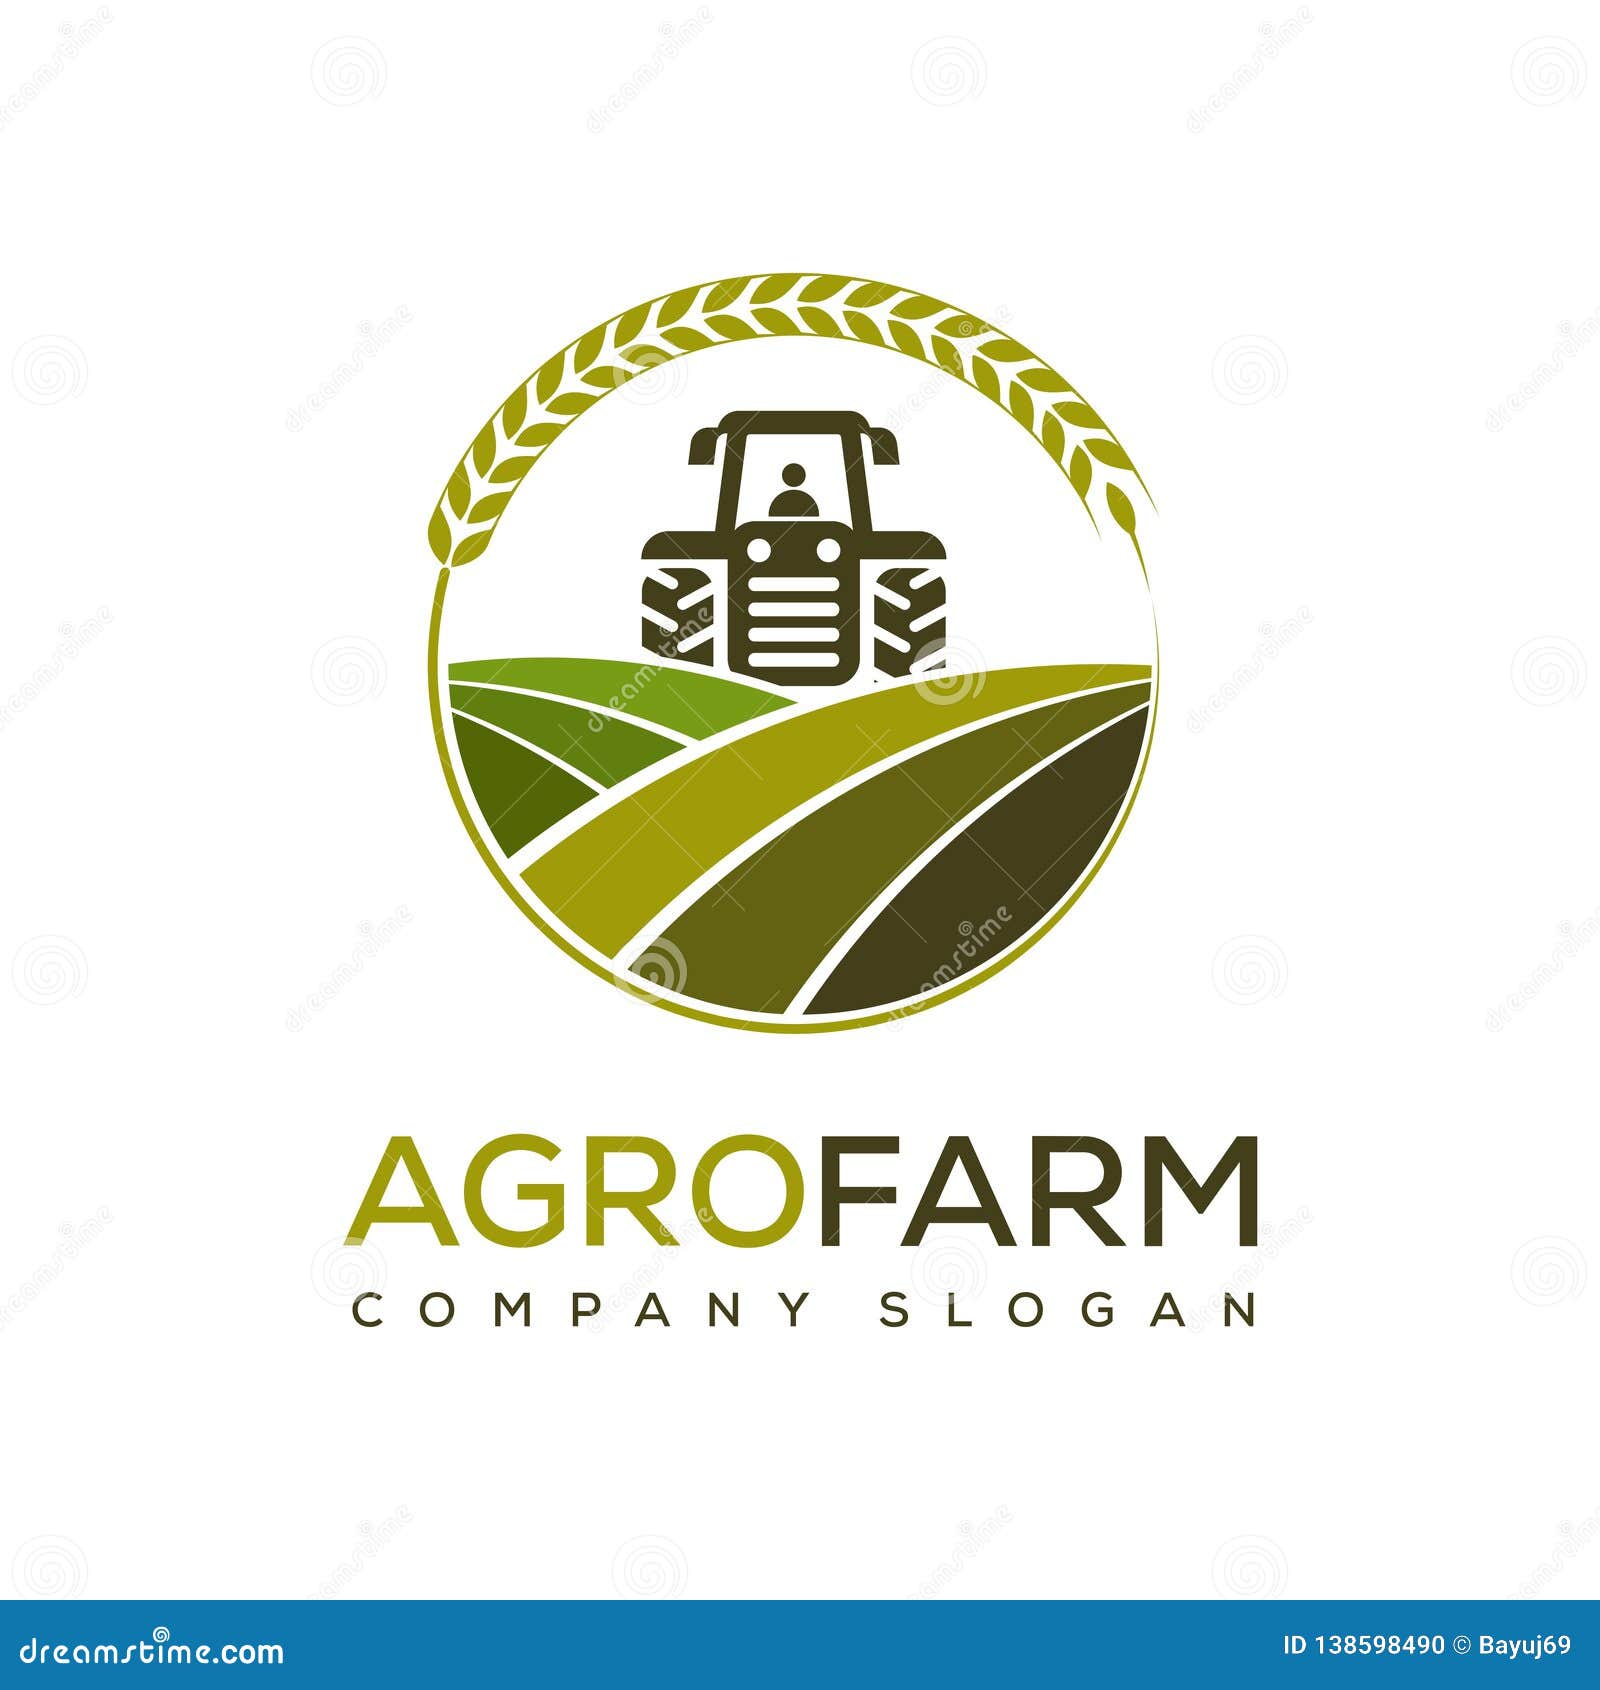 agro farm -  logo   of agriculture business